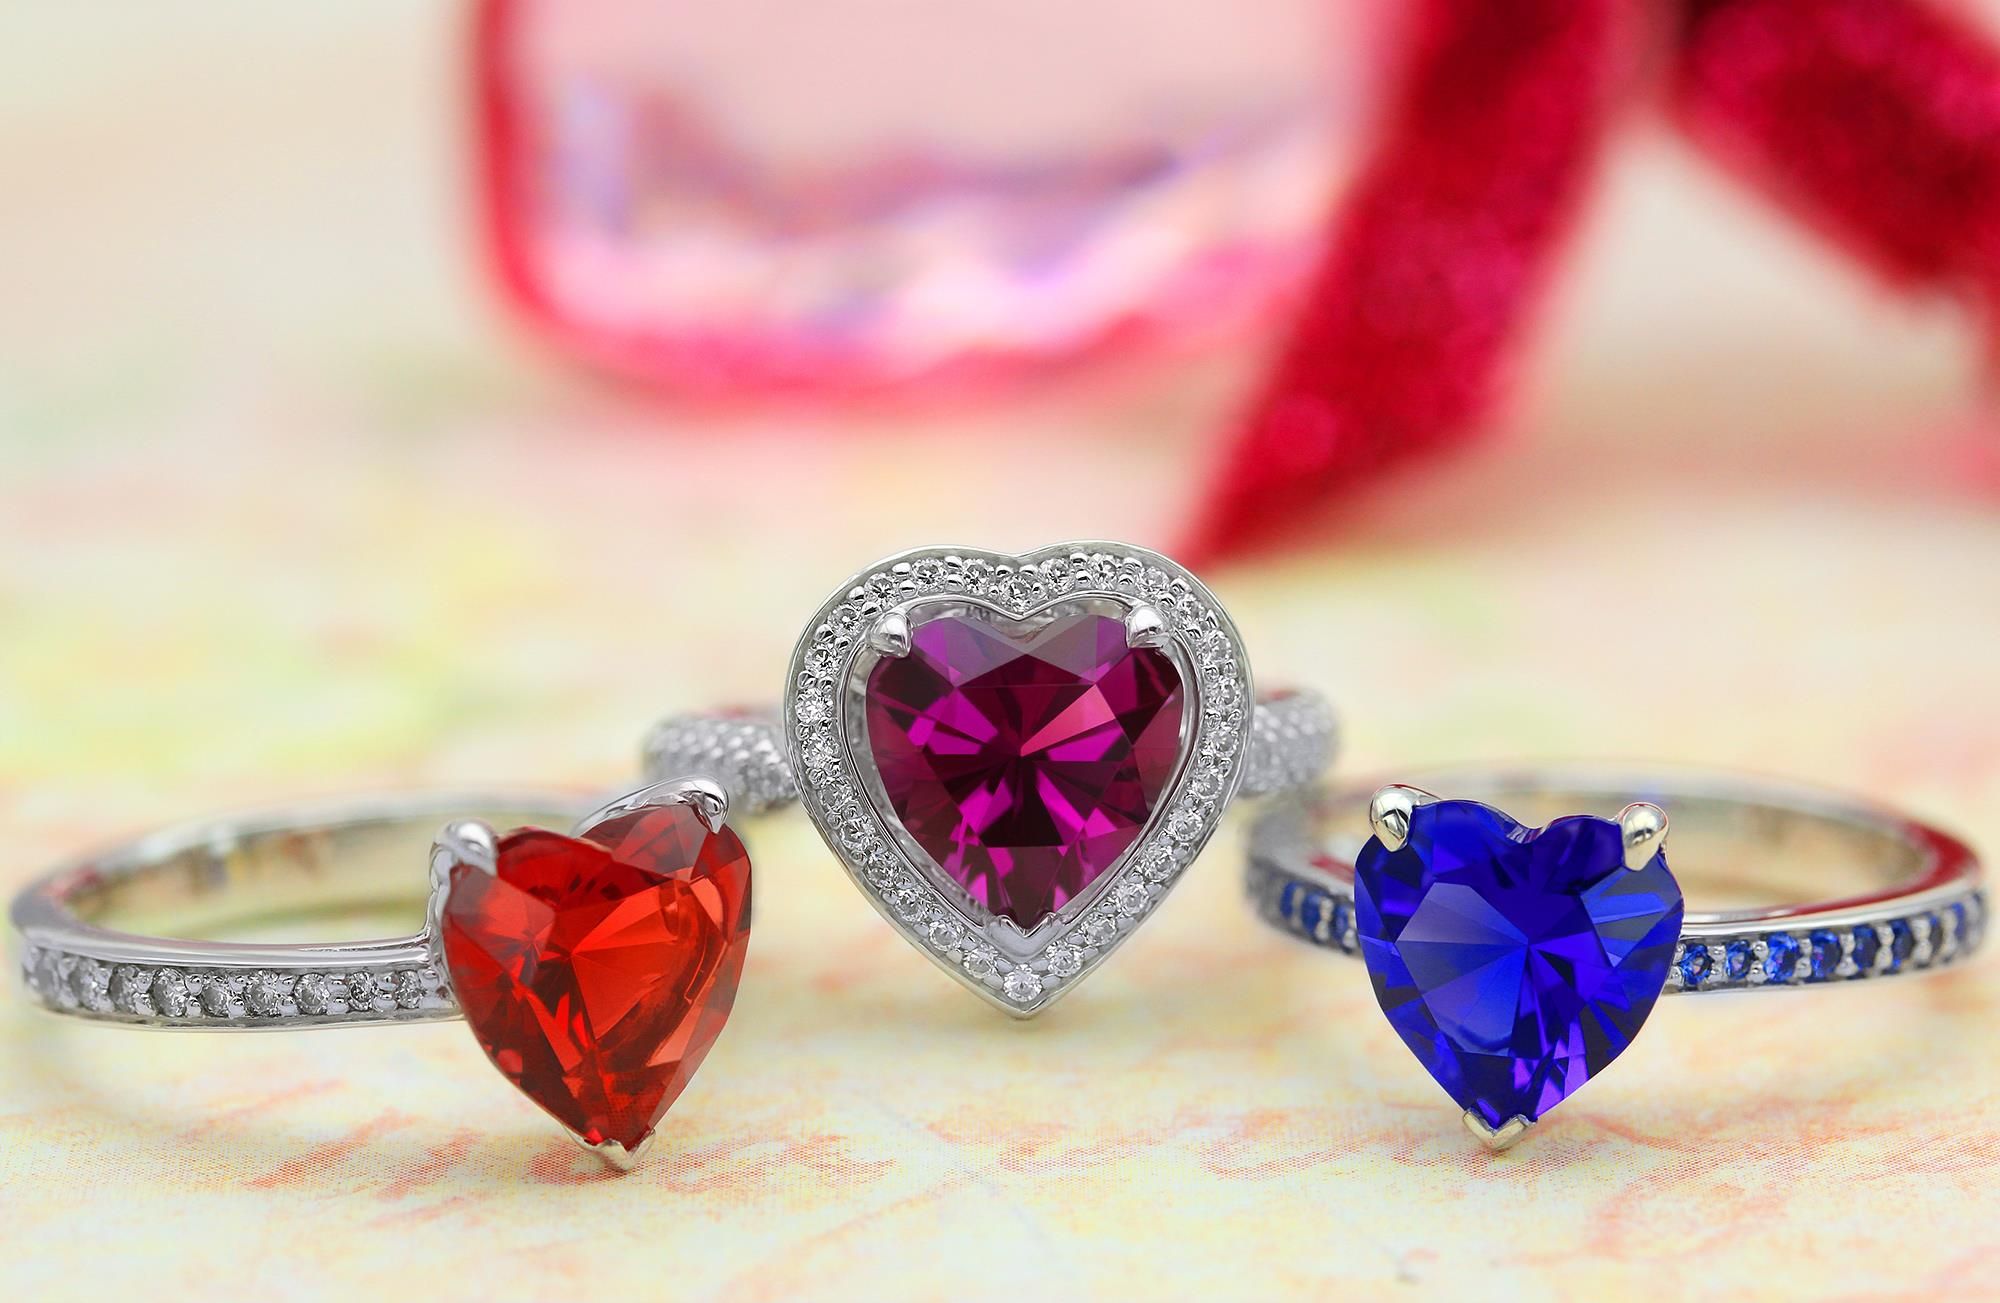 These hearts rings are one of the most beloved symbols in our culture. The precious expression of the moment of happiness.